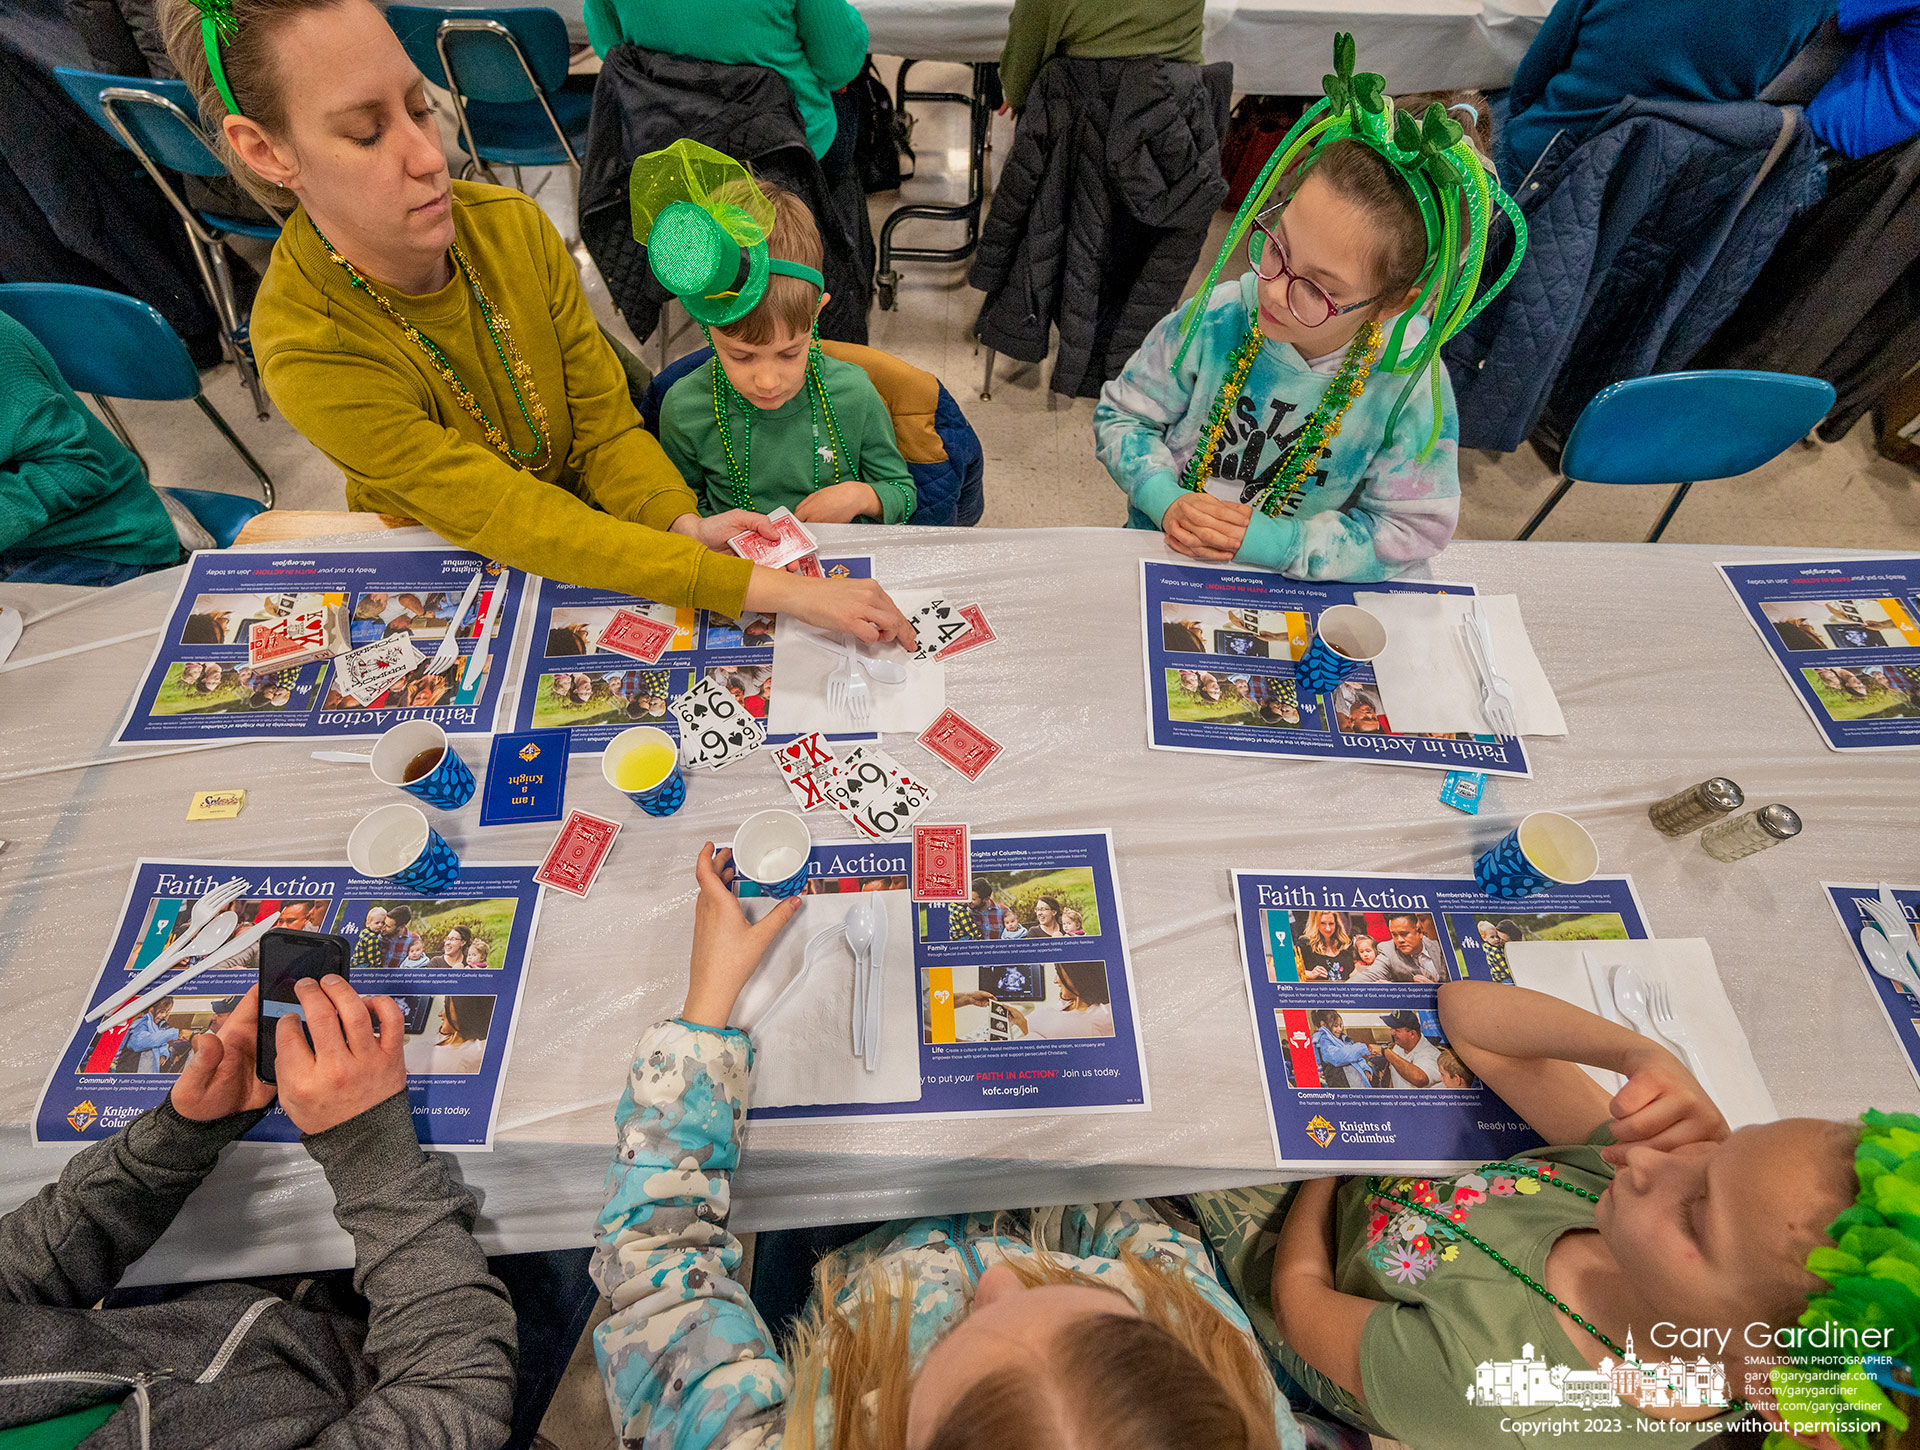 A family wearing St. Patrick green plays a card game after ordering their fish meal at the St. Paul the Apostle Catholic Church's Lenten Friday fish fry. My Final Photo for March 17, 2023.